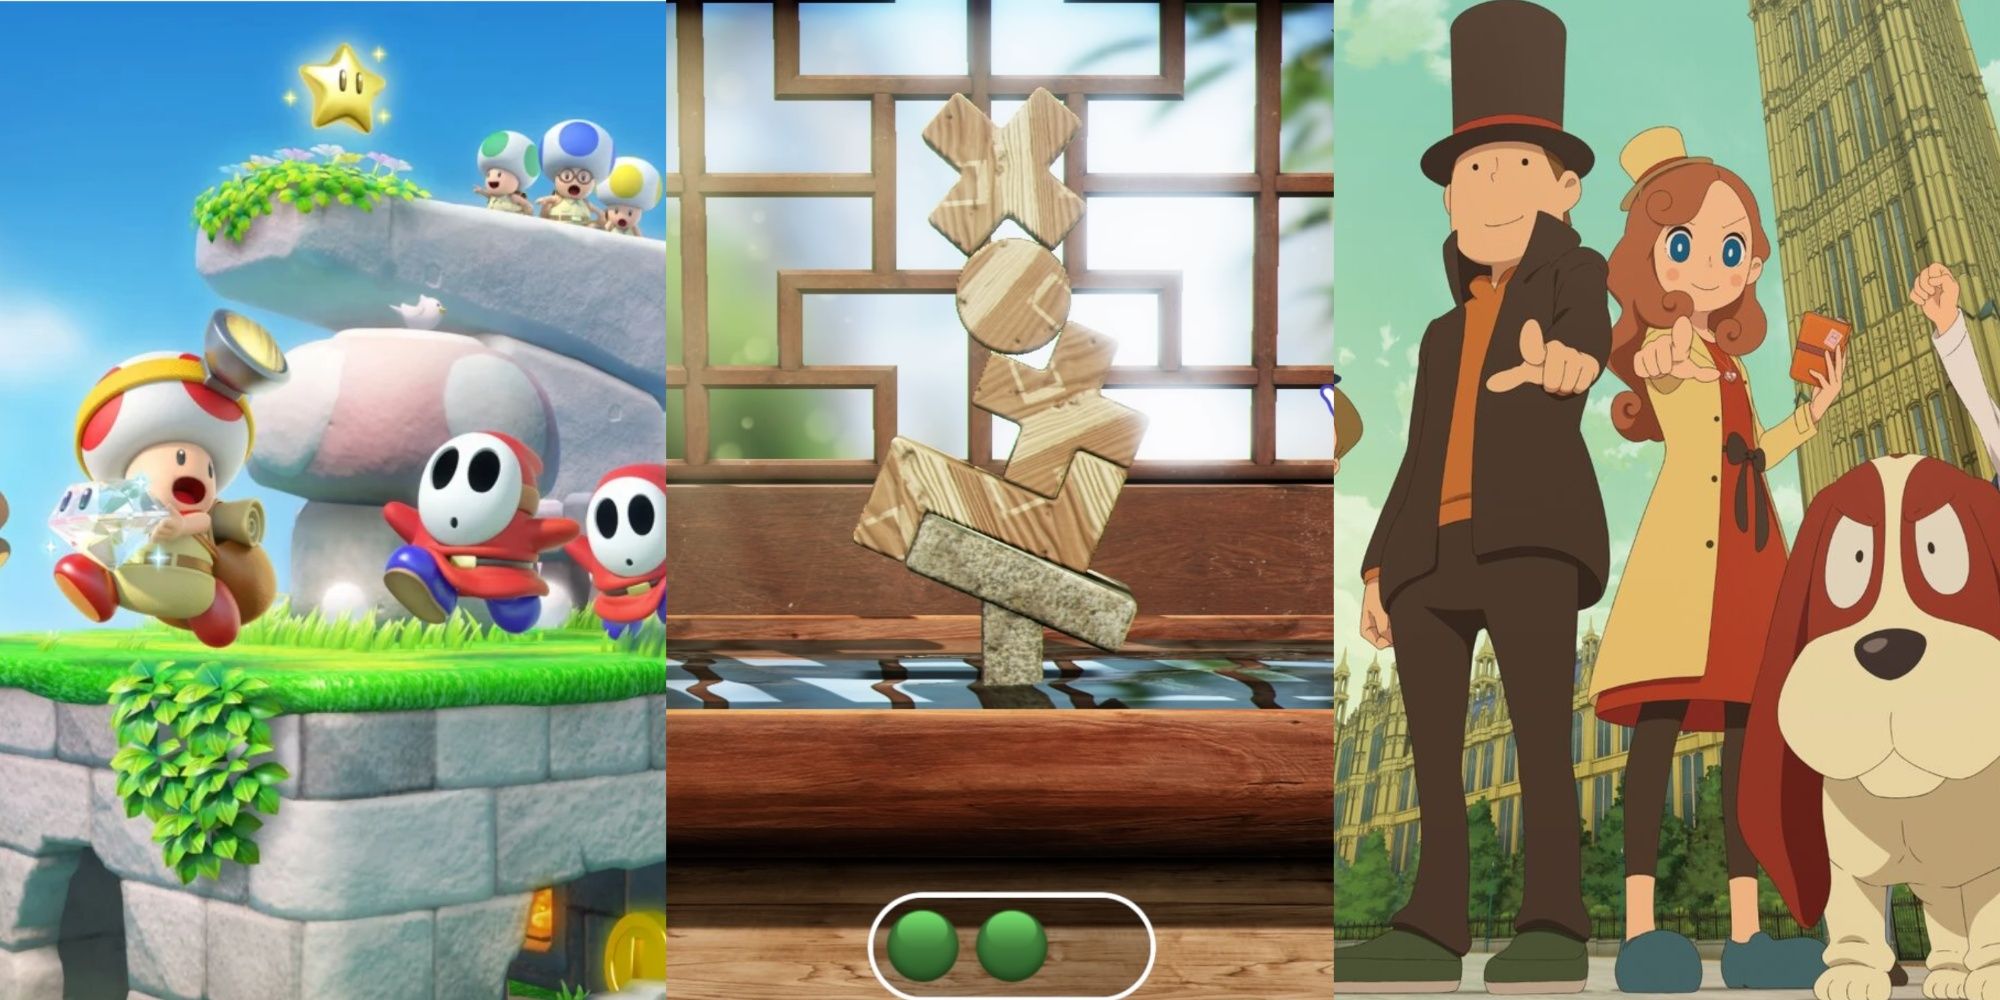 A collage showing three different puzzle games.